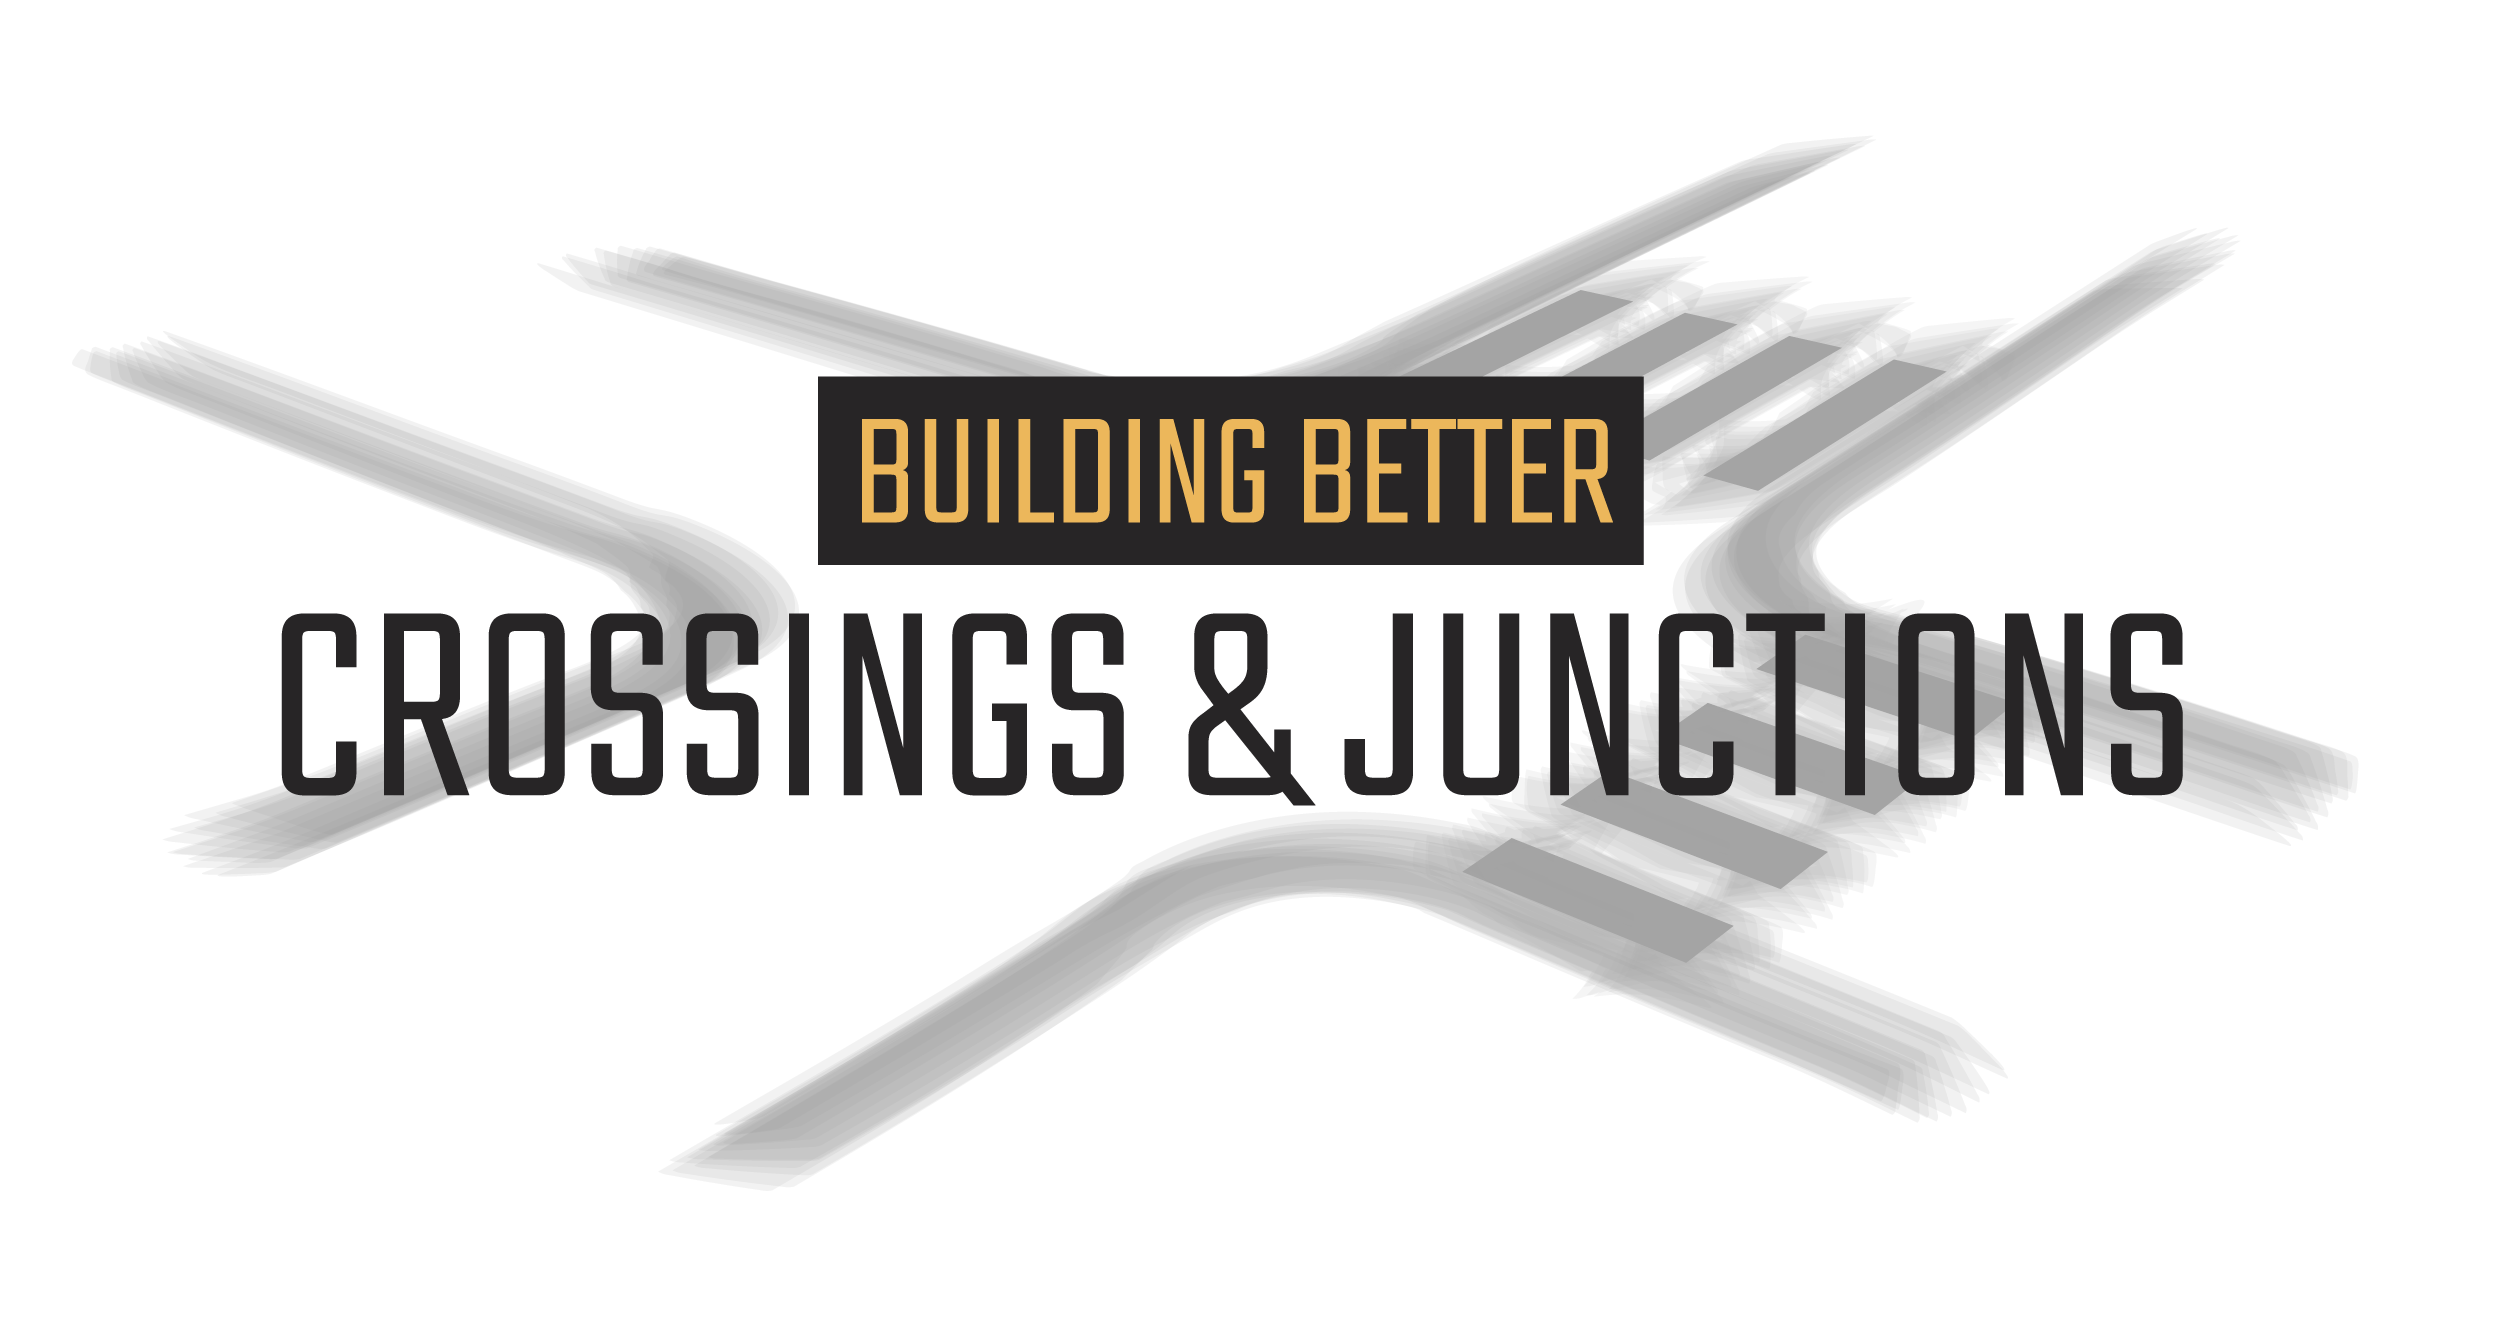 Building Better Crossings and Juntions